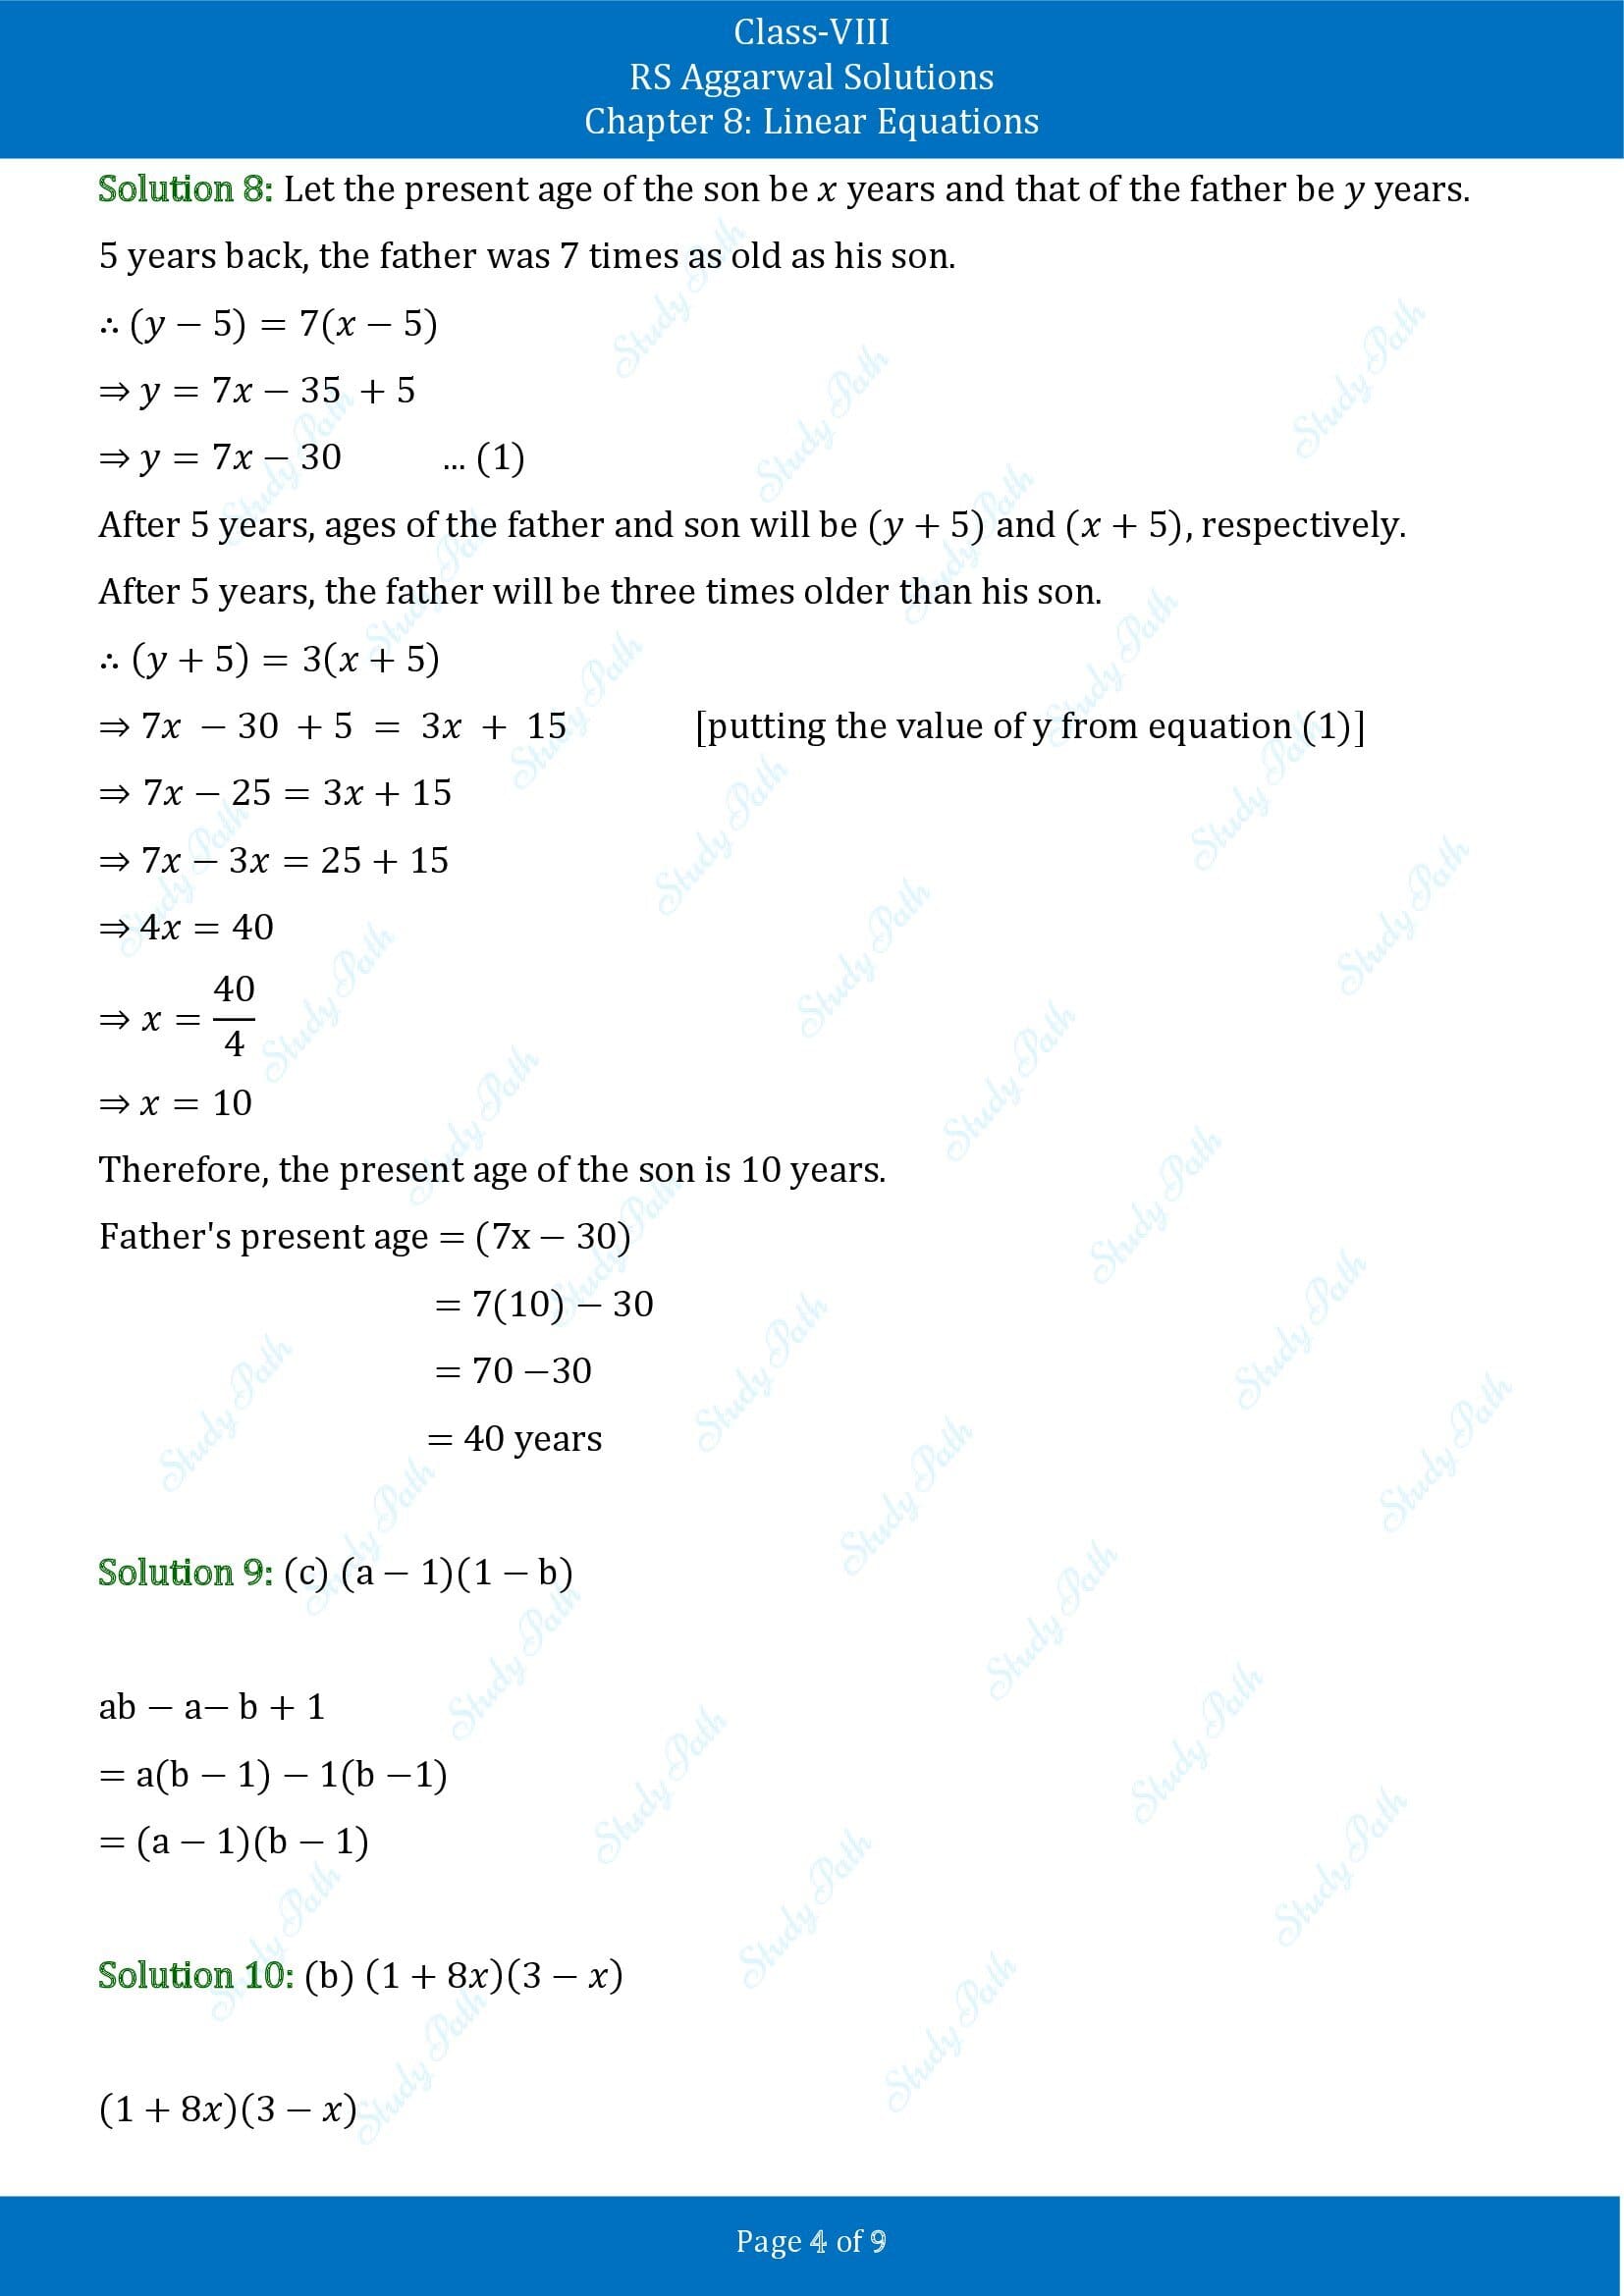 RS Aggarwal Solutions Class 8 Chapter 8 Linear Equations Test Paper 00004